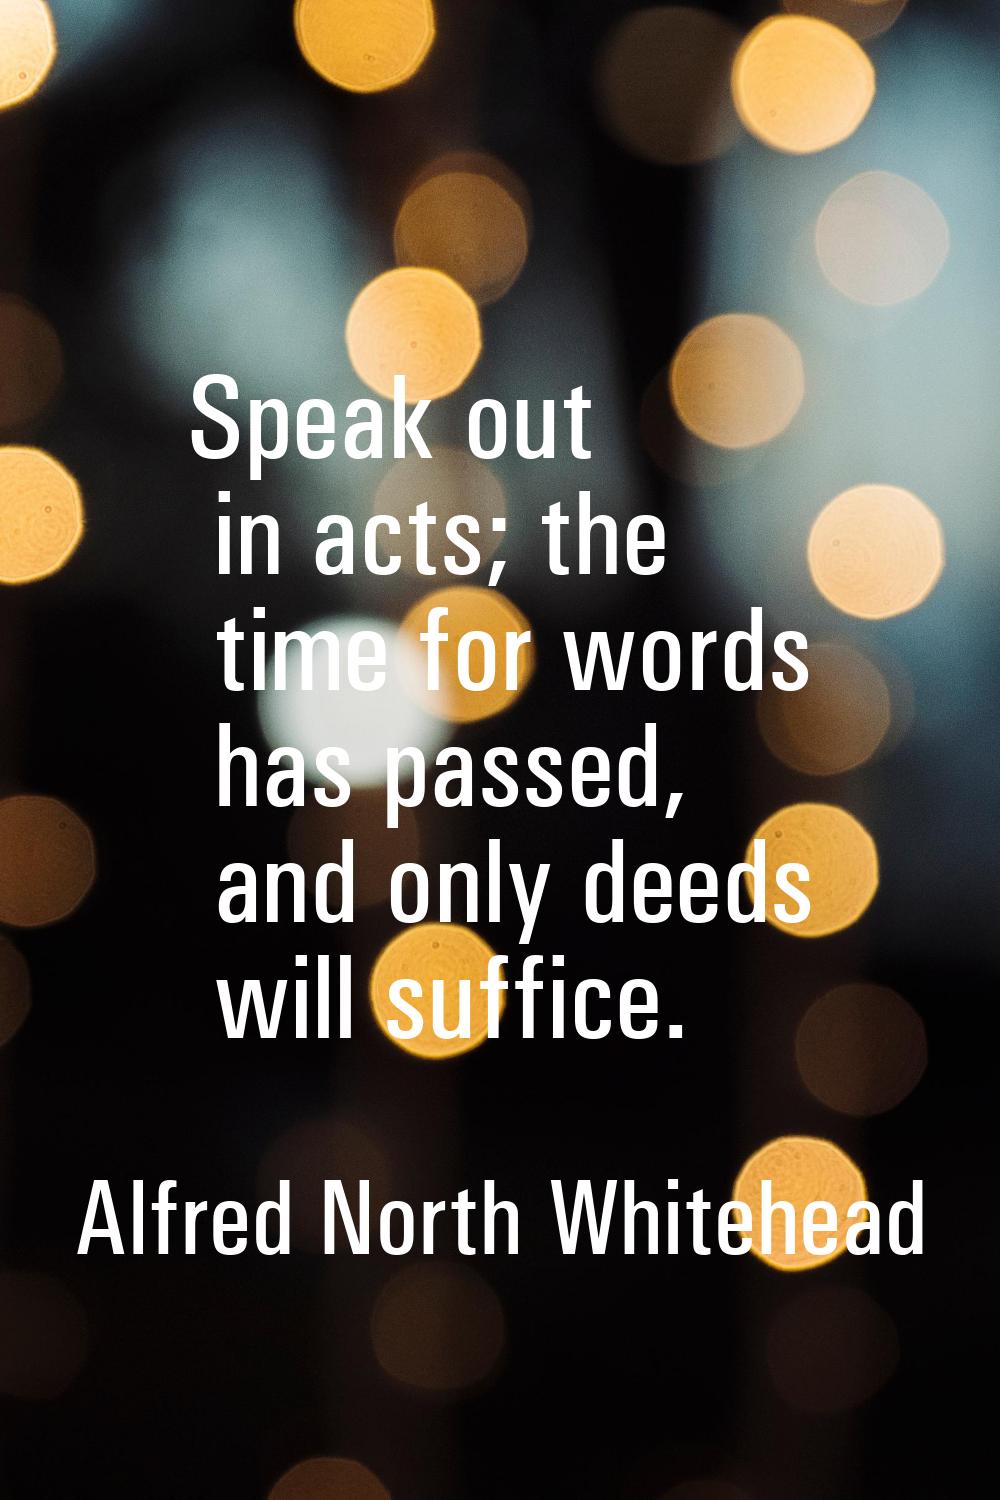 Speak out in acts; the time for words has passed, and only deeds will suffice.